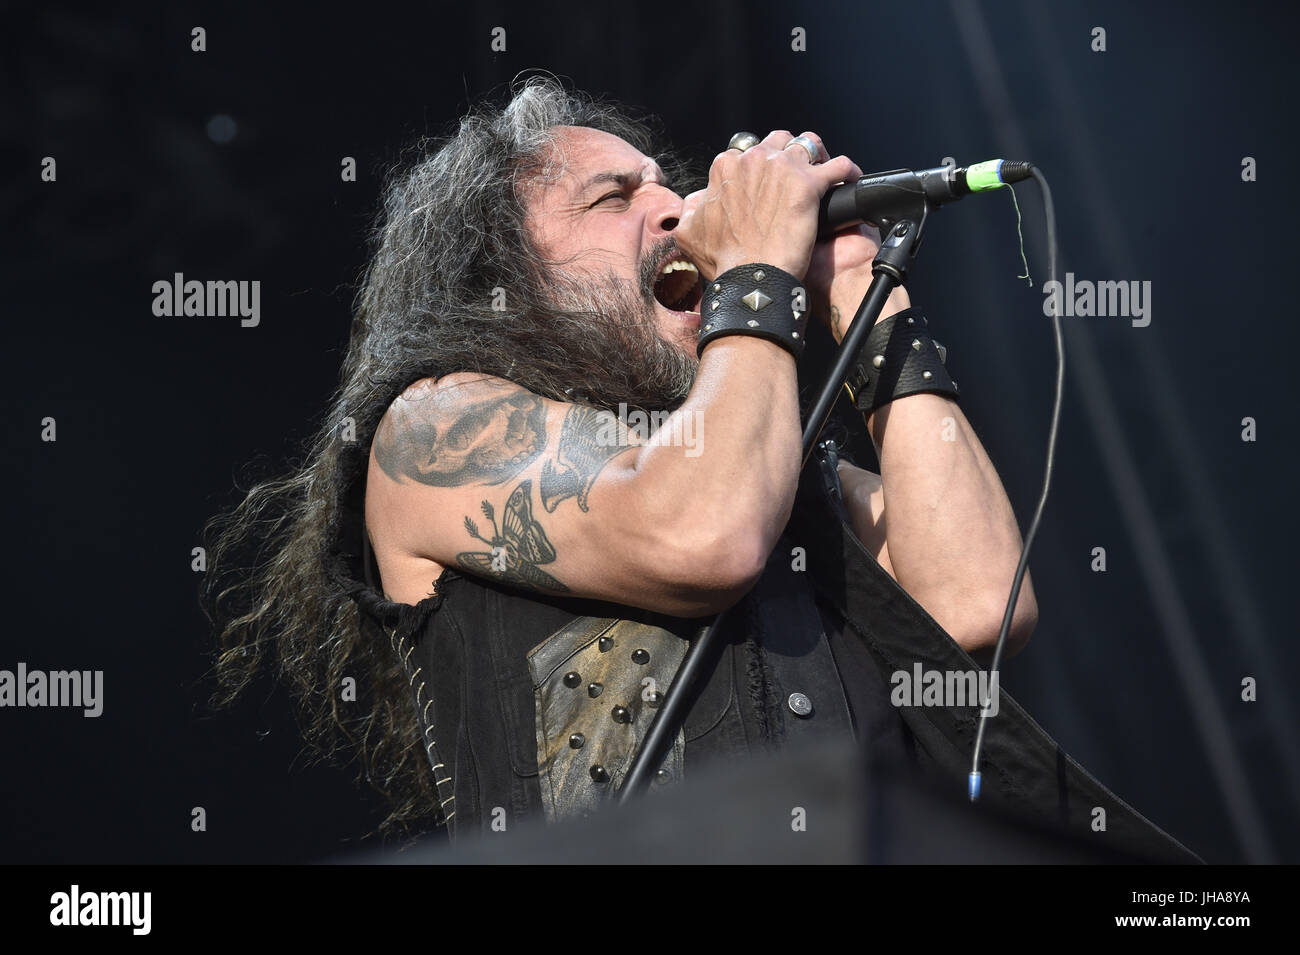 Singer Mark Osegueda from Death Angel music band performs during the opening day of the music festival Masters of Rock in Vizovice, Czech Republic, on July 13, 2017. (CTK Photo/Dalibor Gluck) Stock Photo